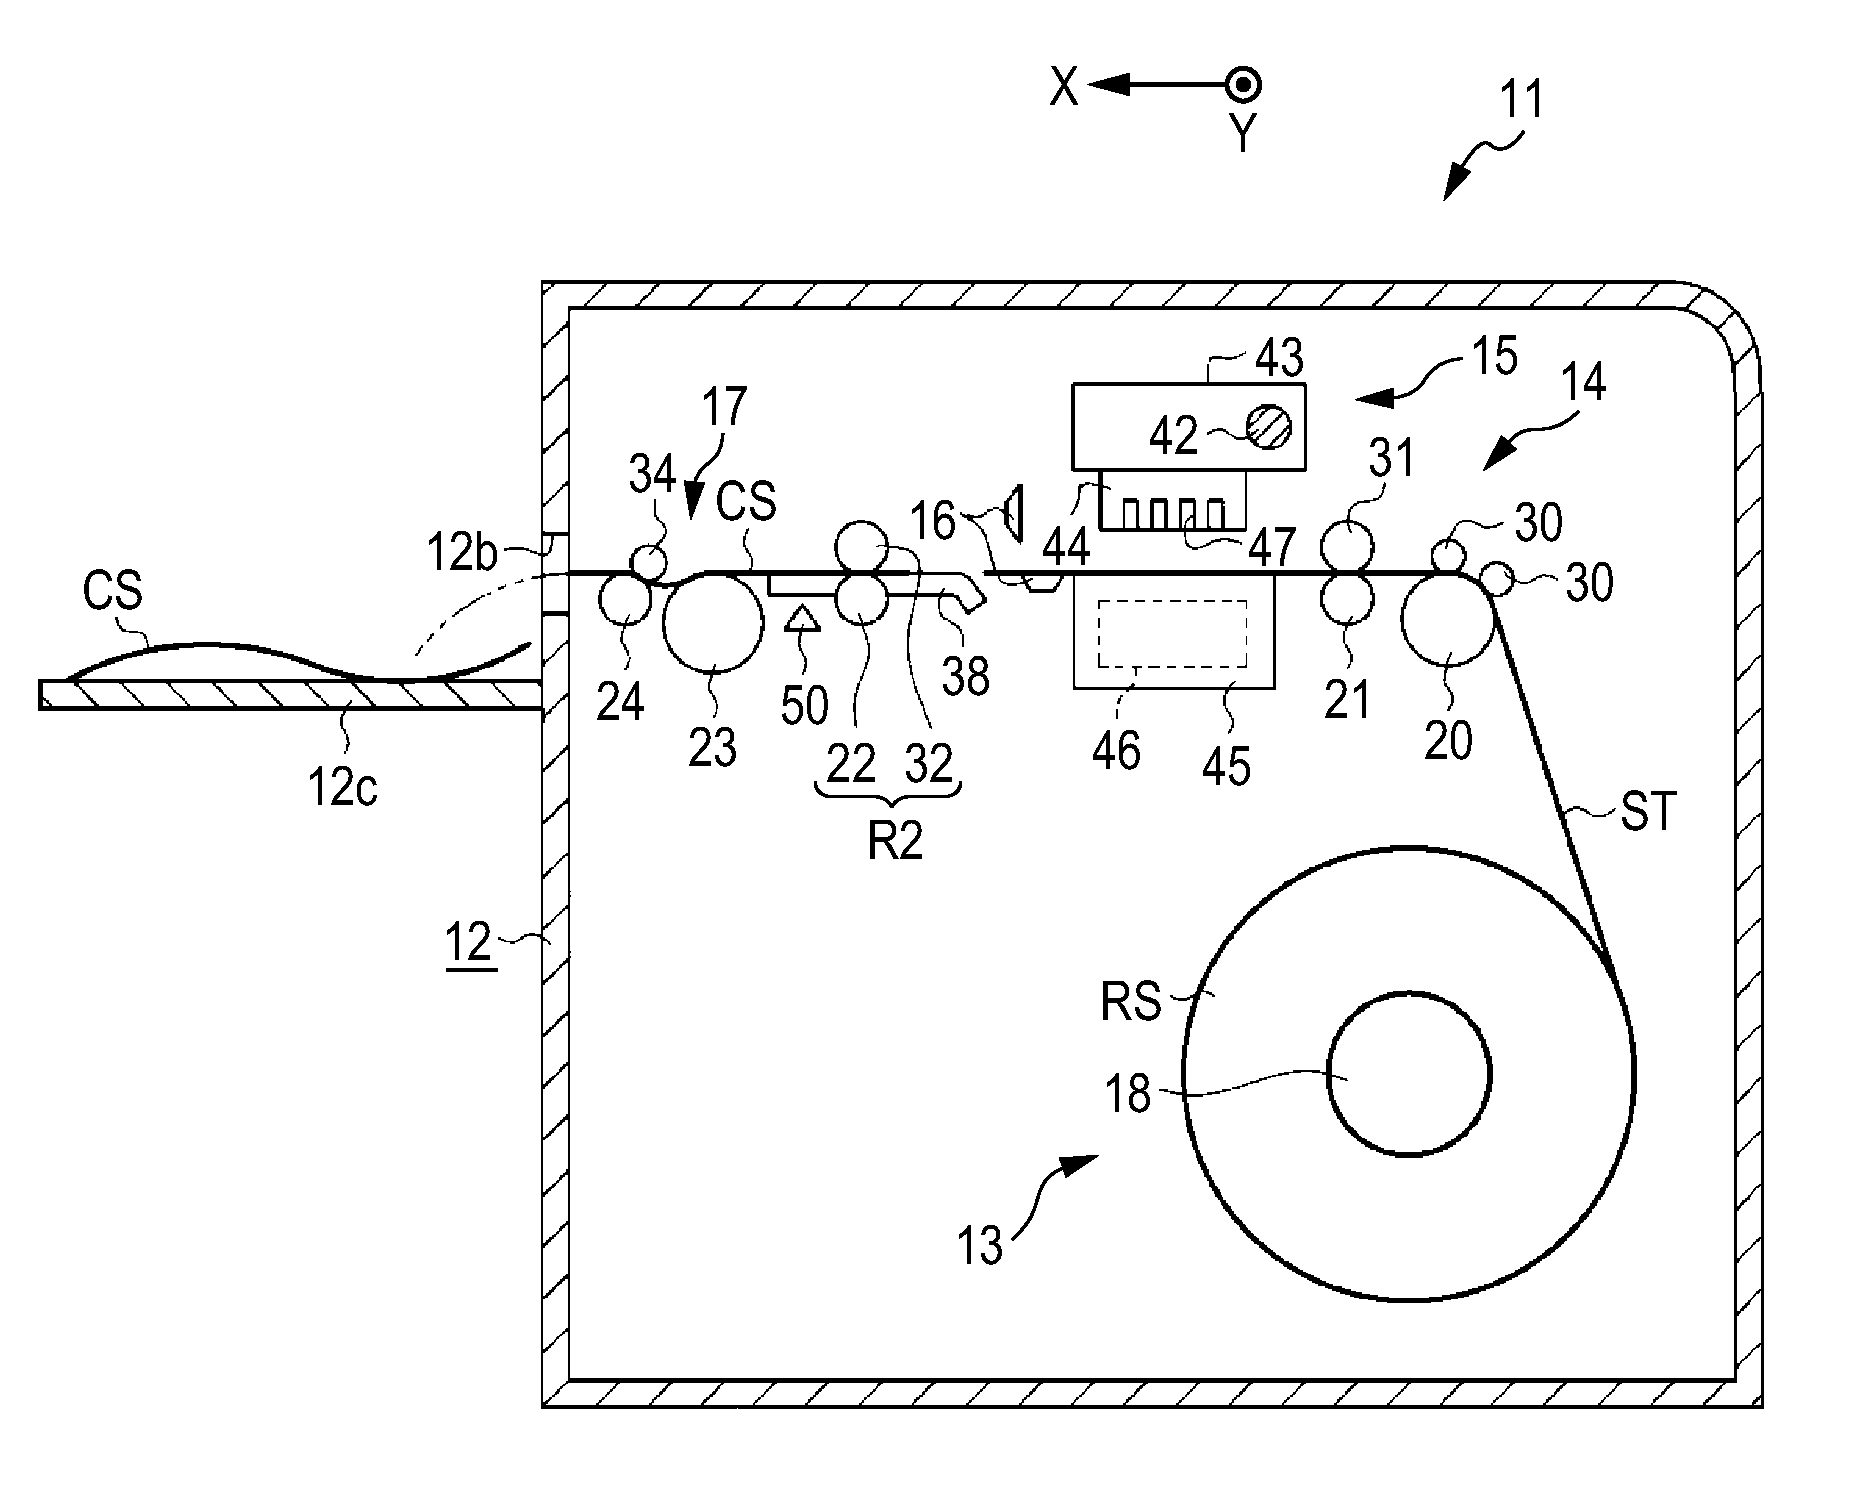 Transportation device and recording apparatus